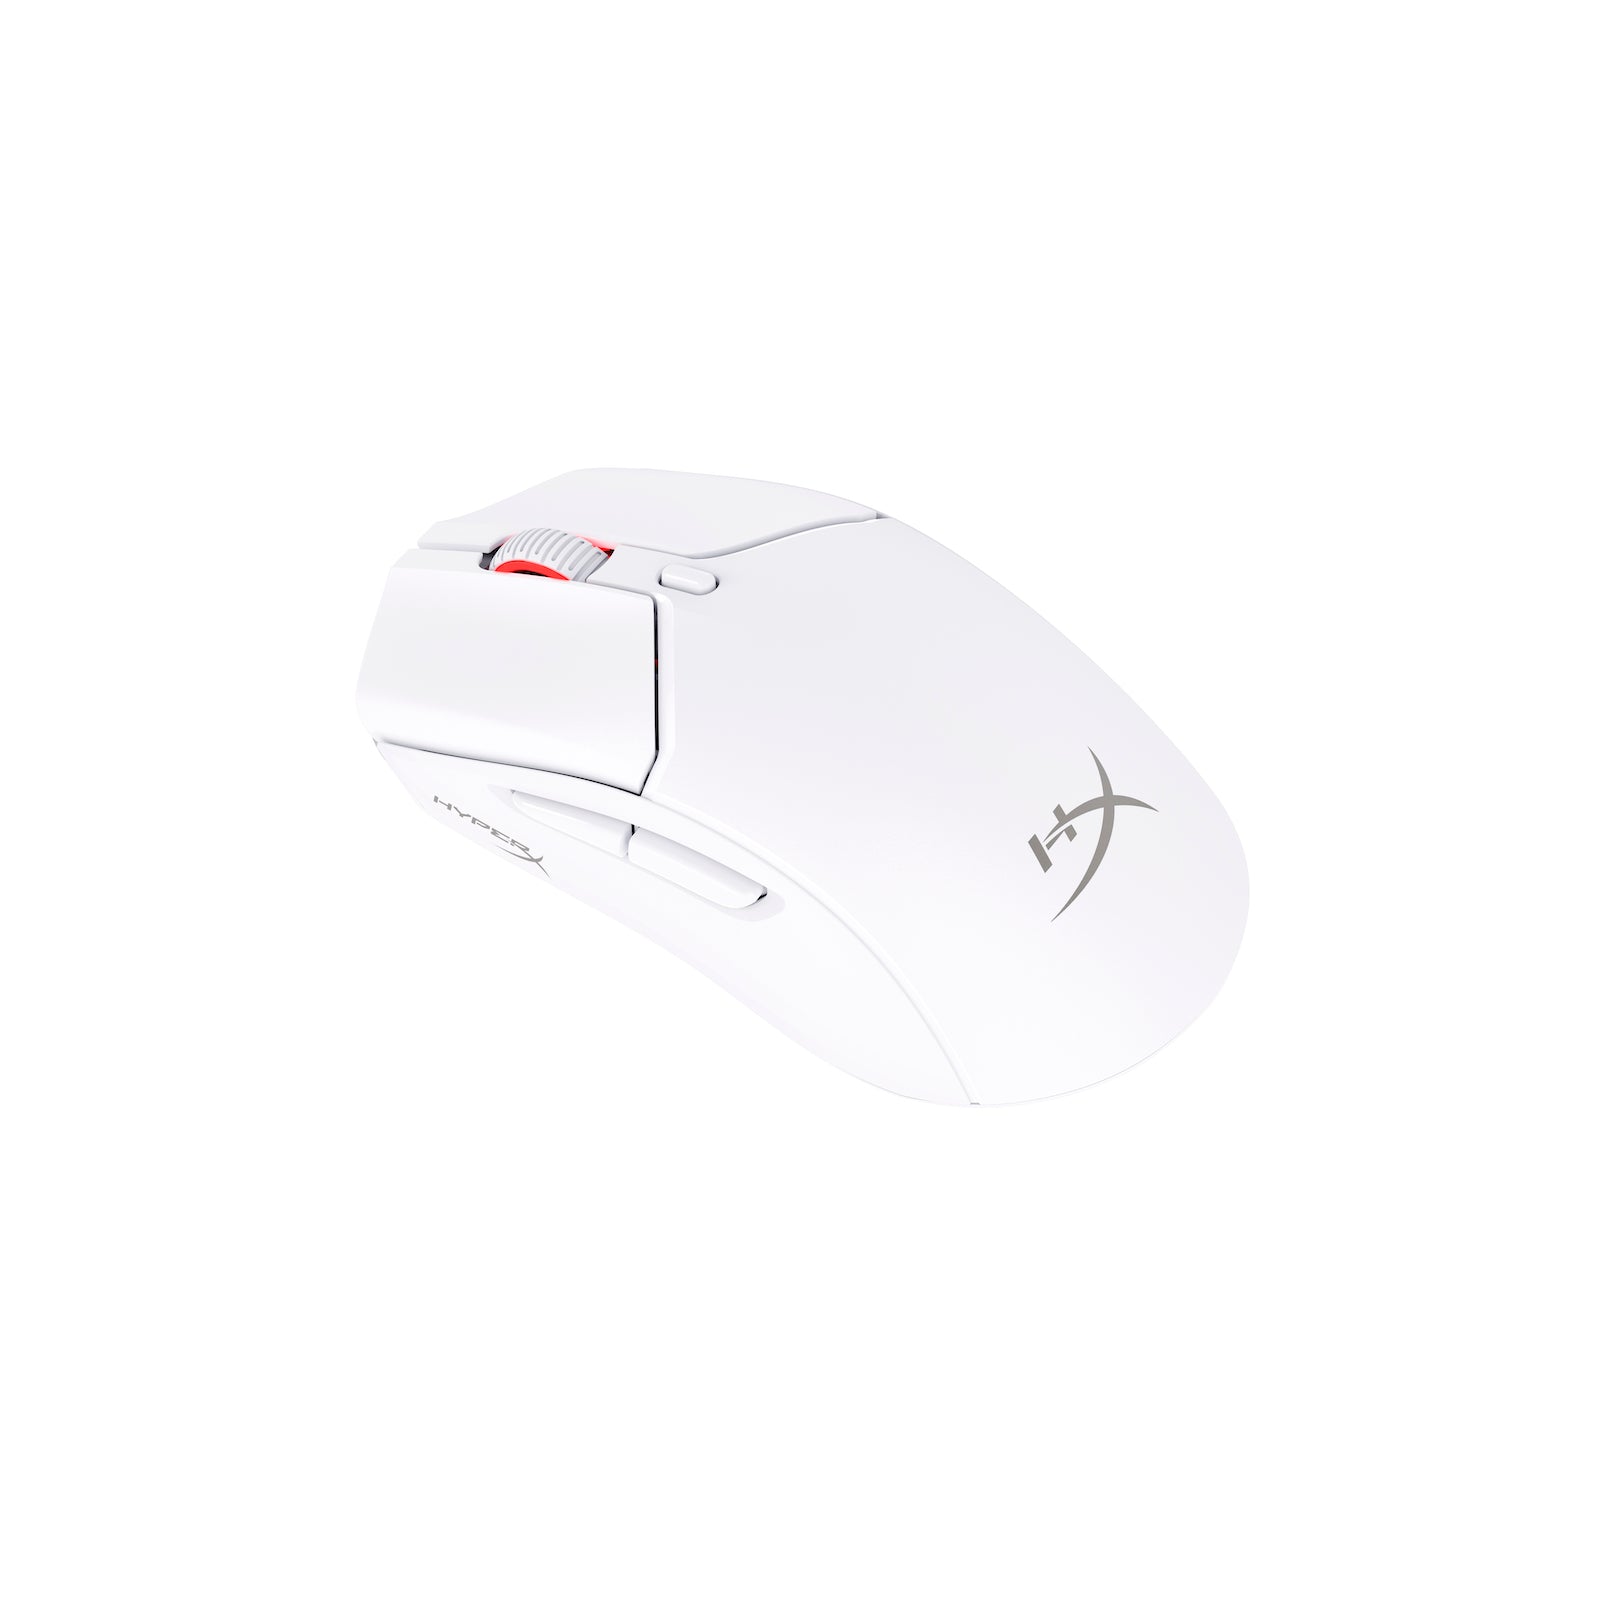 HyperX Pulsefire Haste 2 Wireless White Gaming Mouse -  angled view from the right side